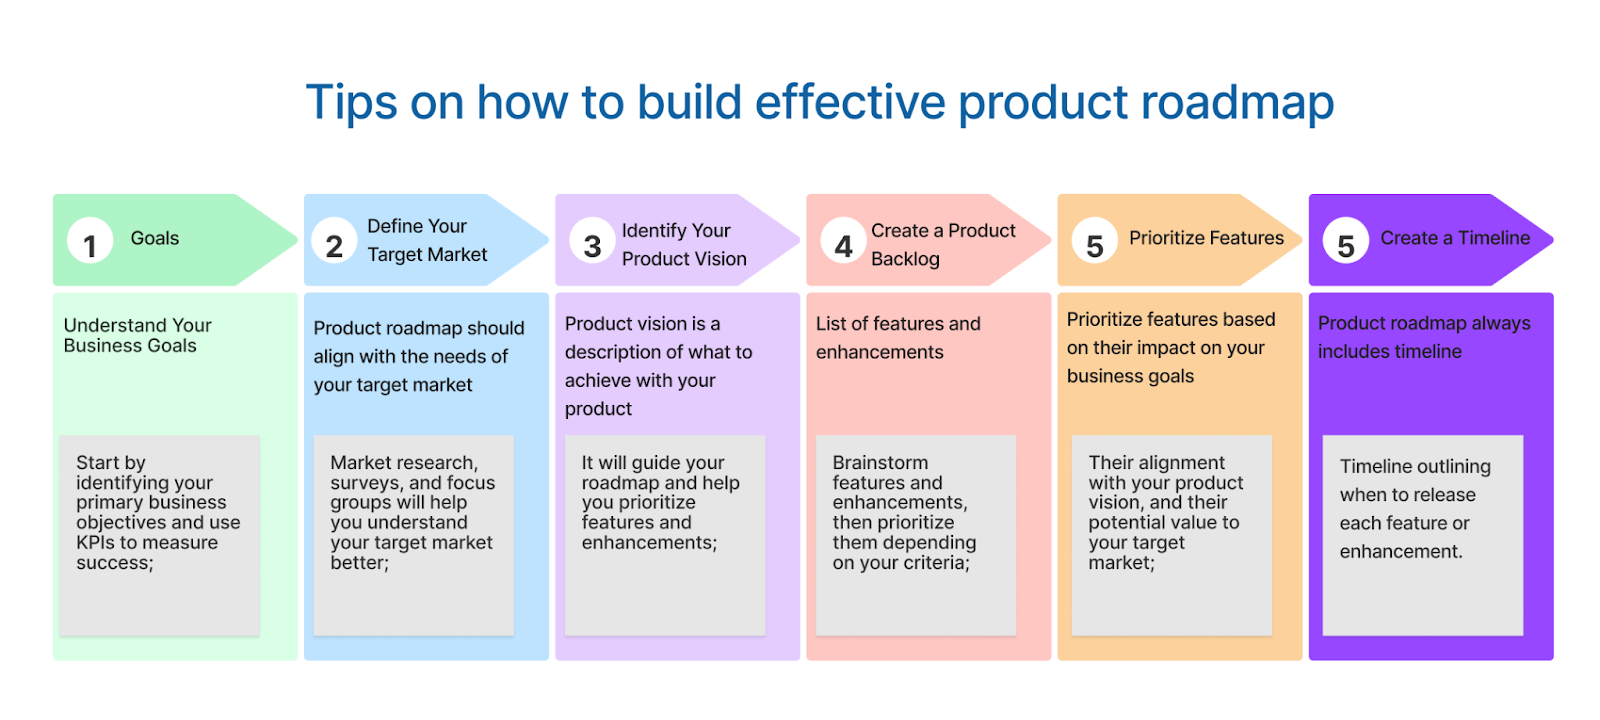 How to Create a Product Roadmap That Aligns with Your Business Goals - Tips on how to build effective product roadmap